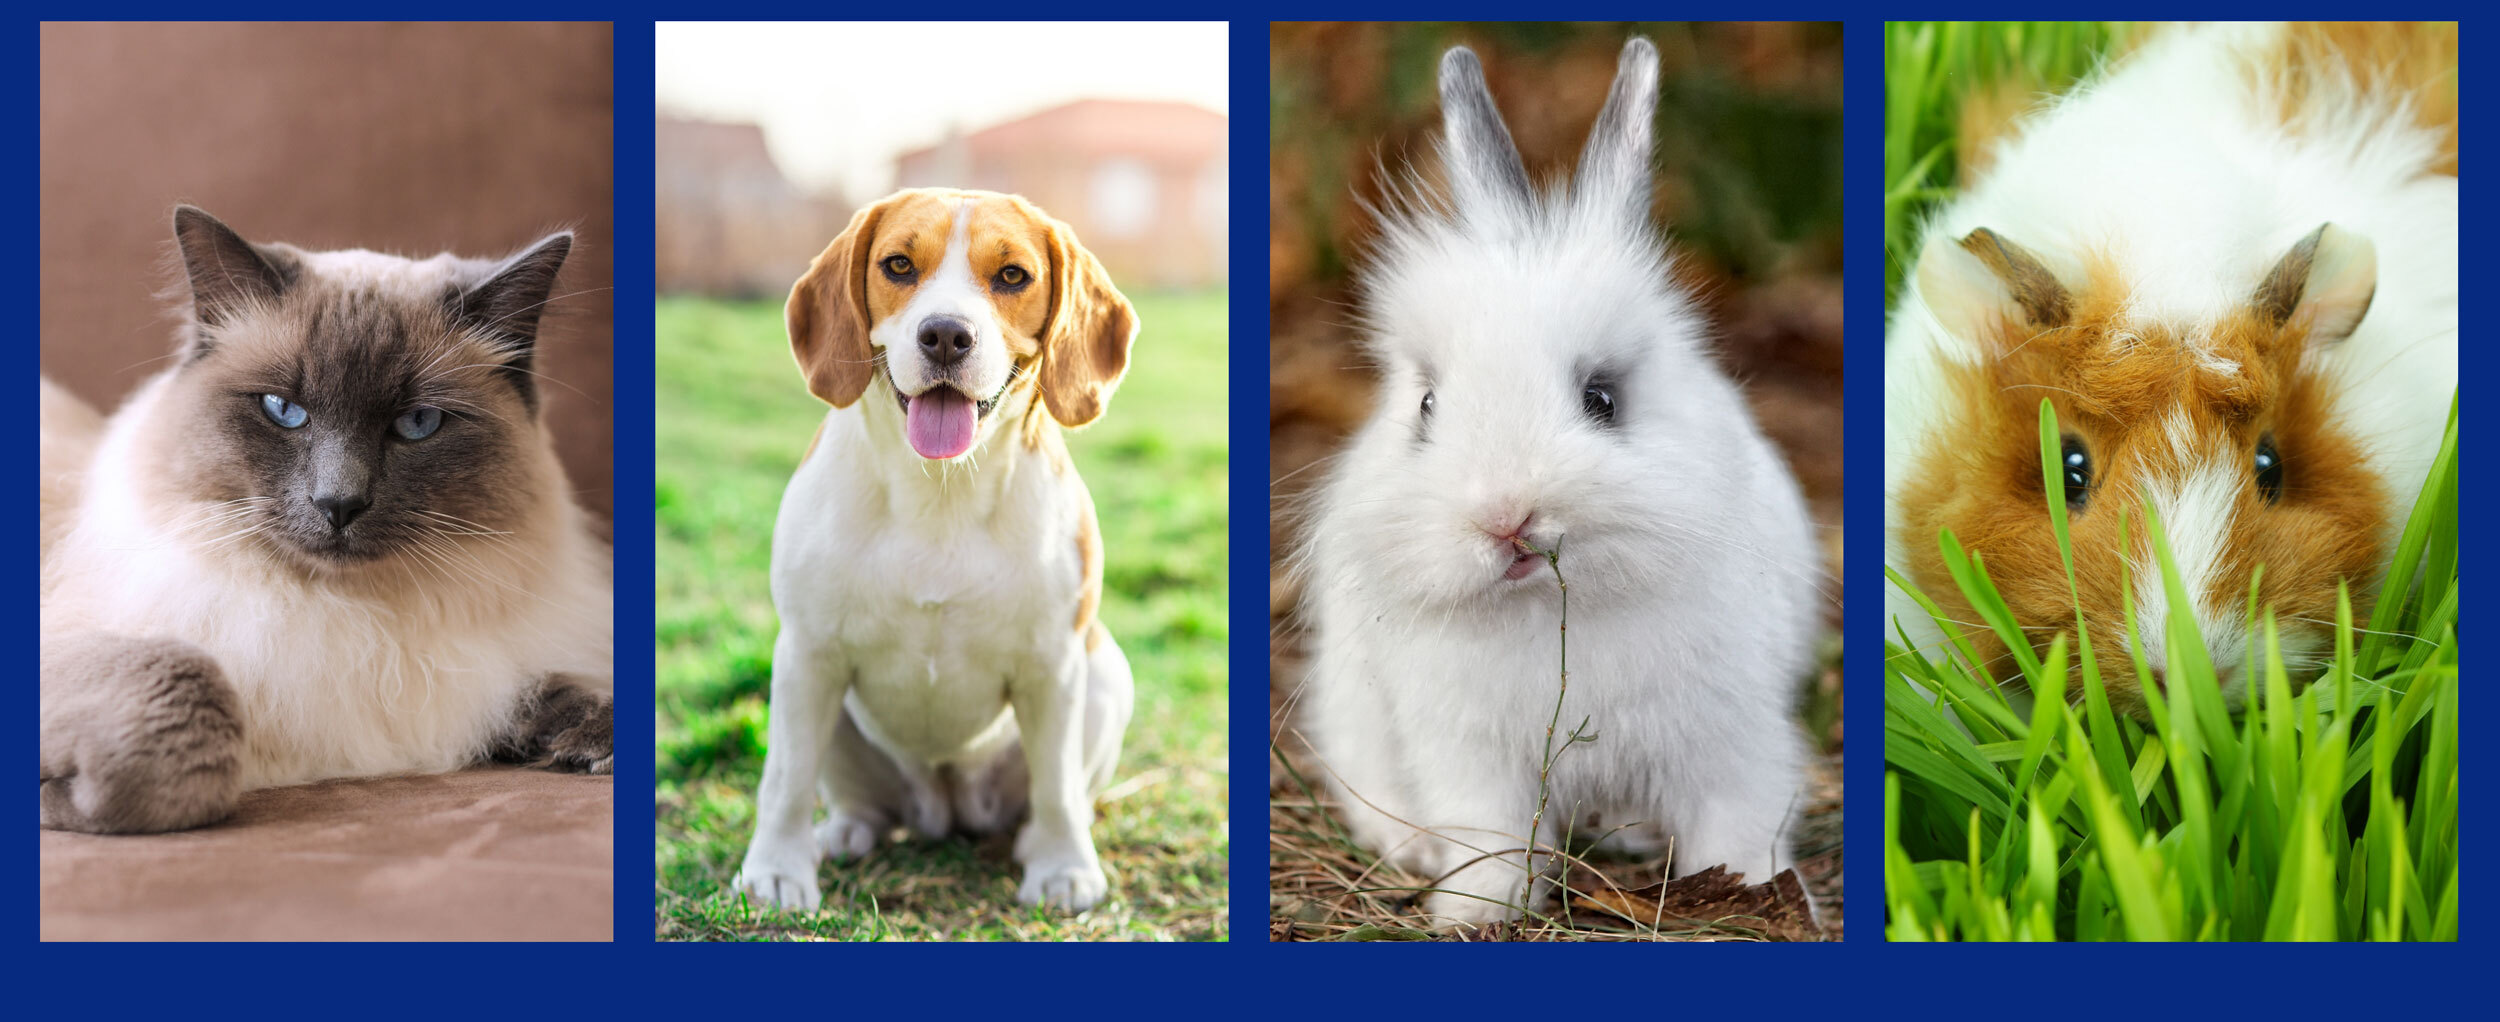 Banner Image of a Cat, Dog, Rabbit and Guinea Pig